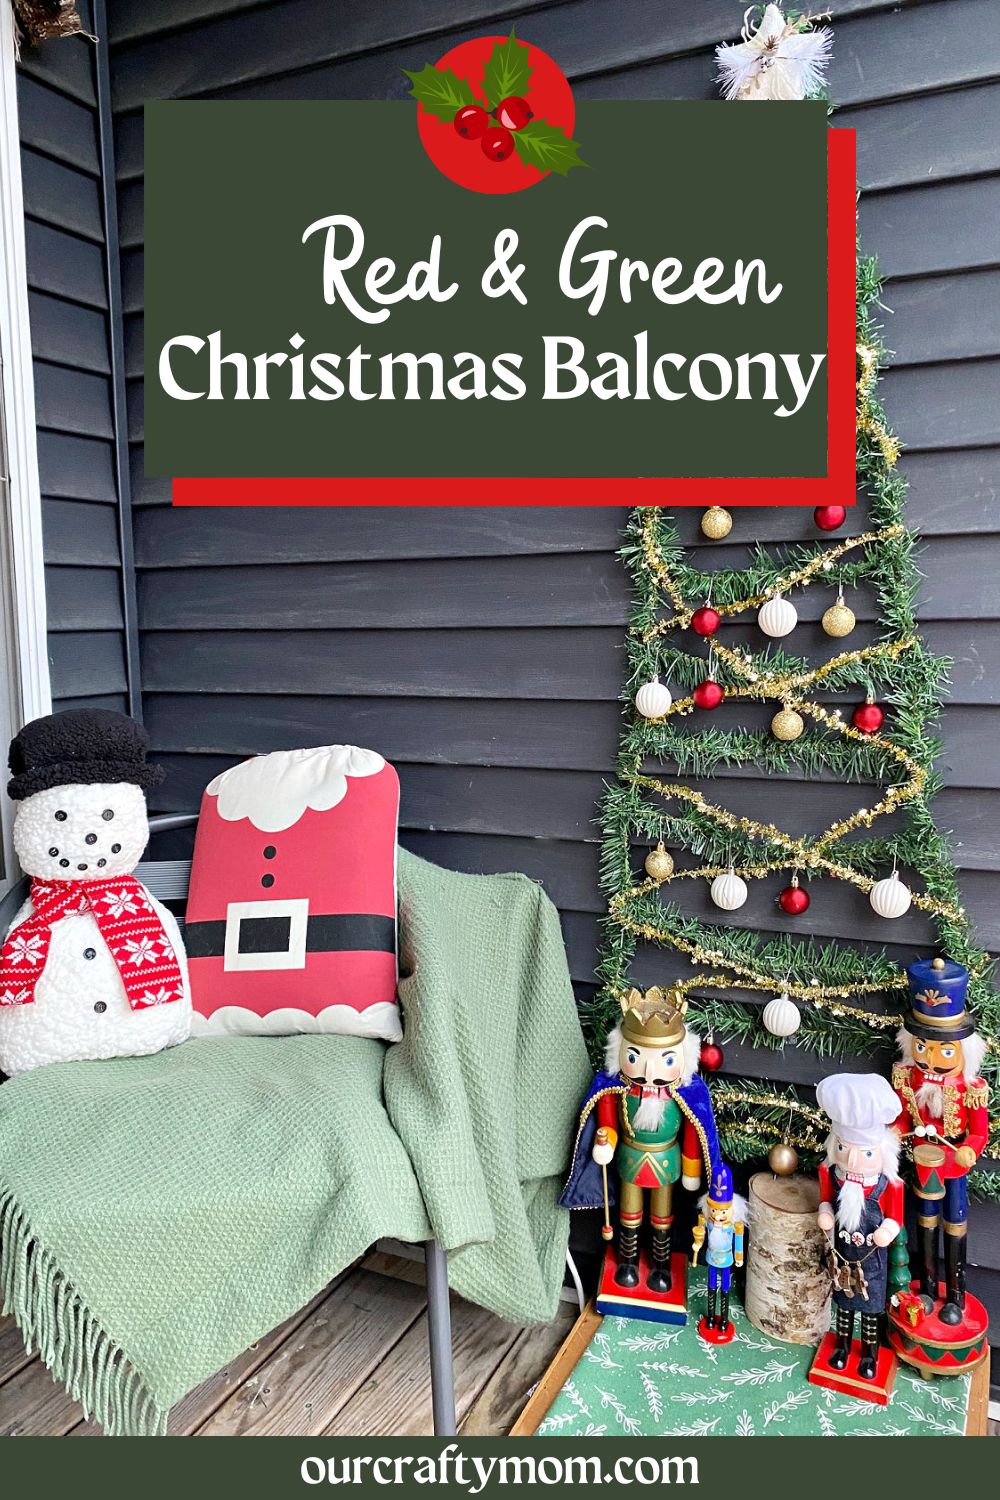 red and green Christmas balcony pin